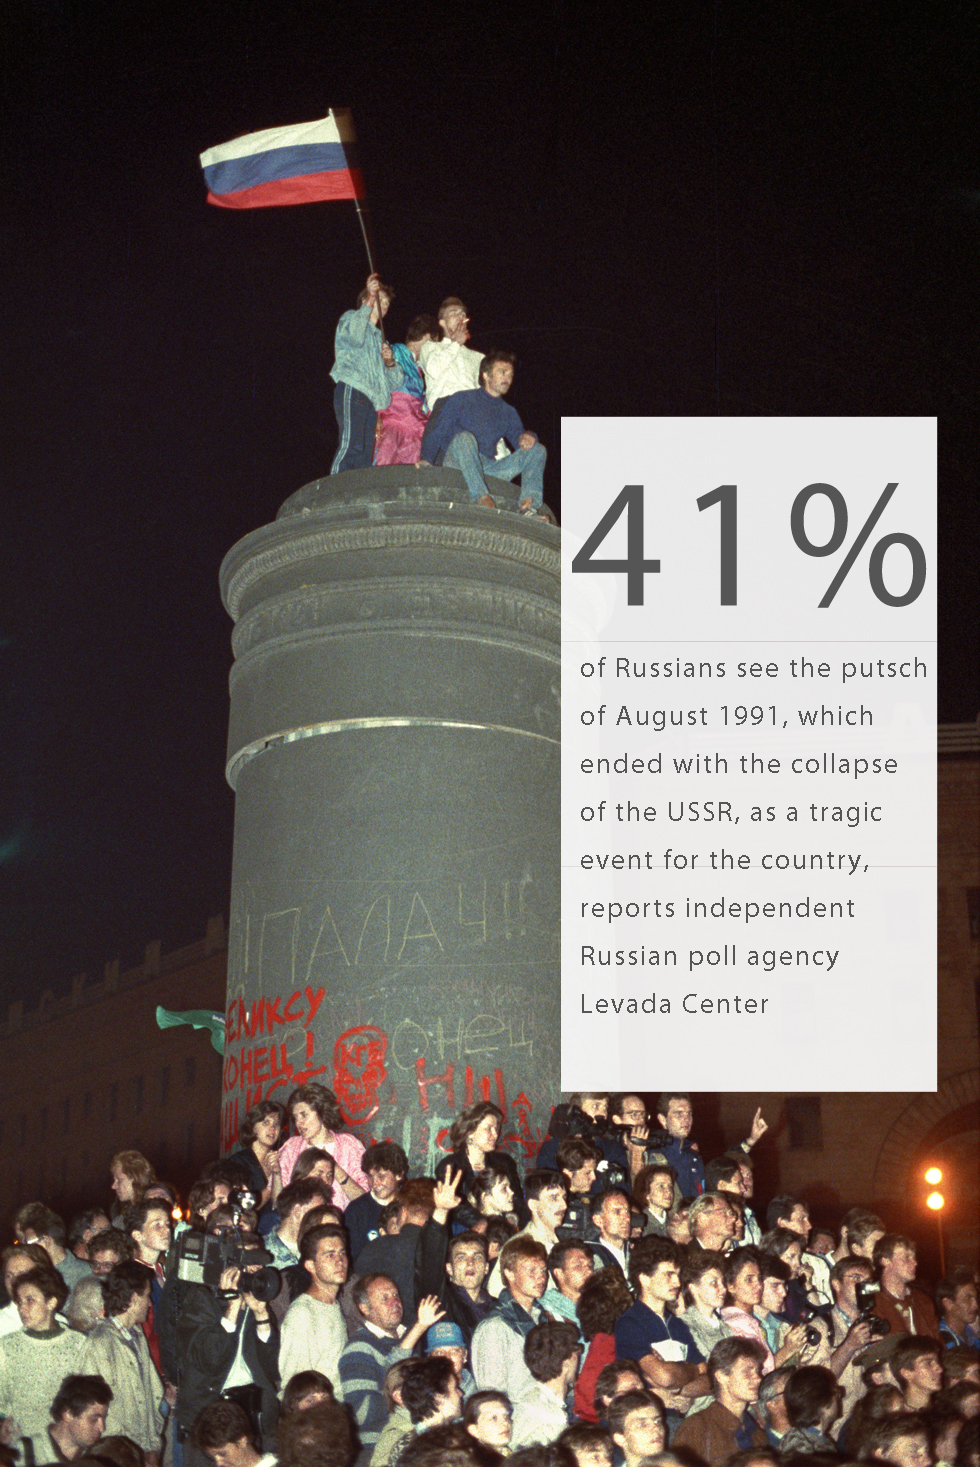 41% of Russians see the putsch of August 1991, which ended with the collapse of the USSR, as a tragic event for the country, reports independent Russian poll agency Levada Center.The figure is 14% more than in 1994, when the majority characterized the coup as “just a fight for power” Today only 10% of those interviewed see it as a victory for democracy37% of modern Russians think the country started to go the wrong way in 1991.In this photo a monument to Felix Dzerzhinsky, chairman of the All-Russian Extraordinary Committee (VChK) - a precursor to the KGB - is seen being dismantled during a rally in Lubyanka Square on the night from August 22 to 23, 1991. Photo by TASS / Andrei Solovyov; Gennady KhamelyaninRead more: 25 years of post-Soviet Russia: How far has the country come?